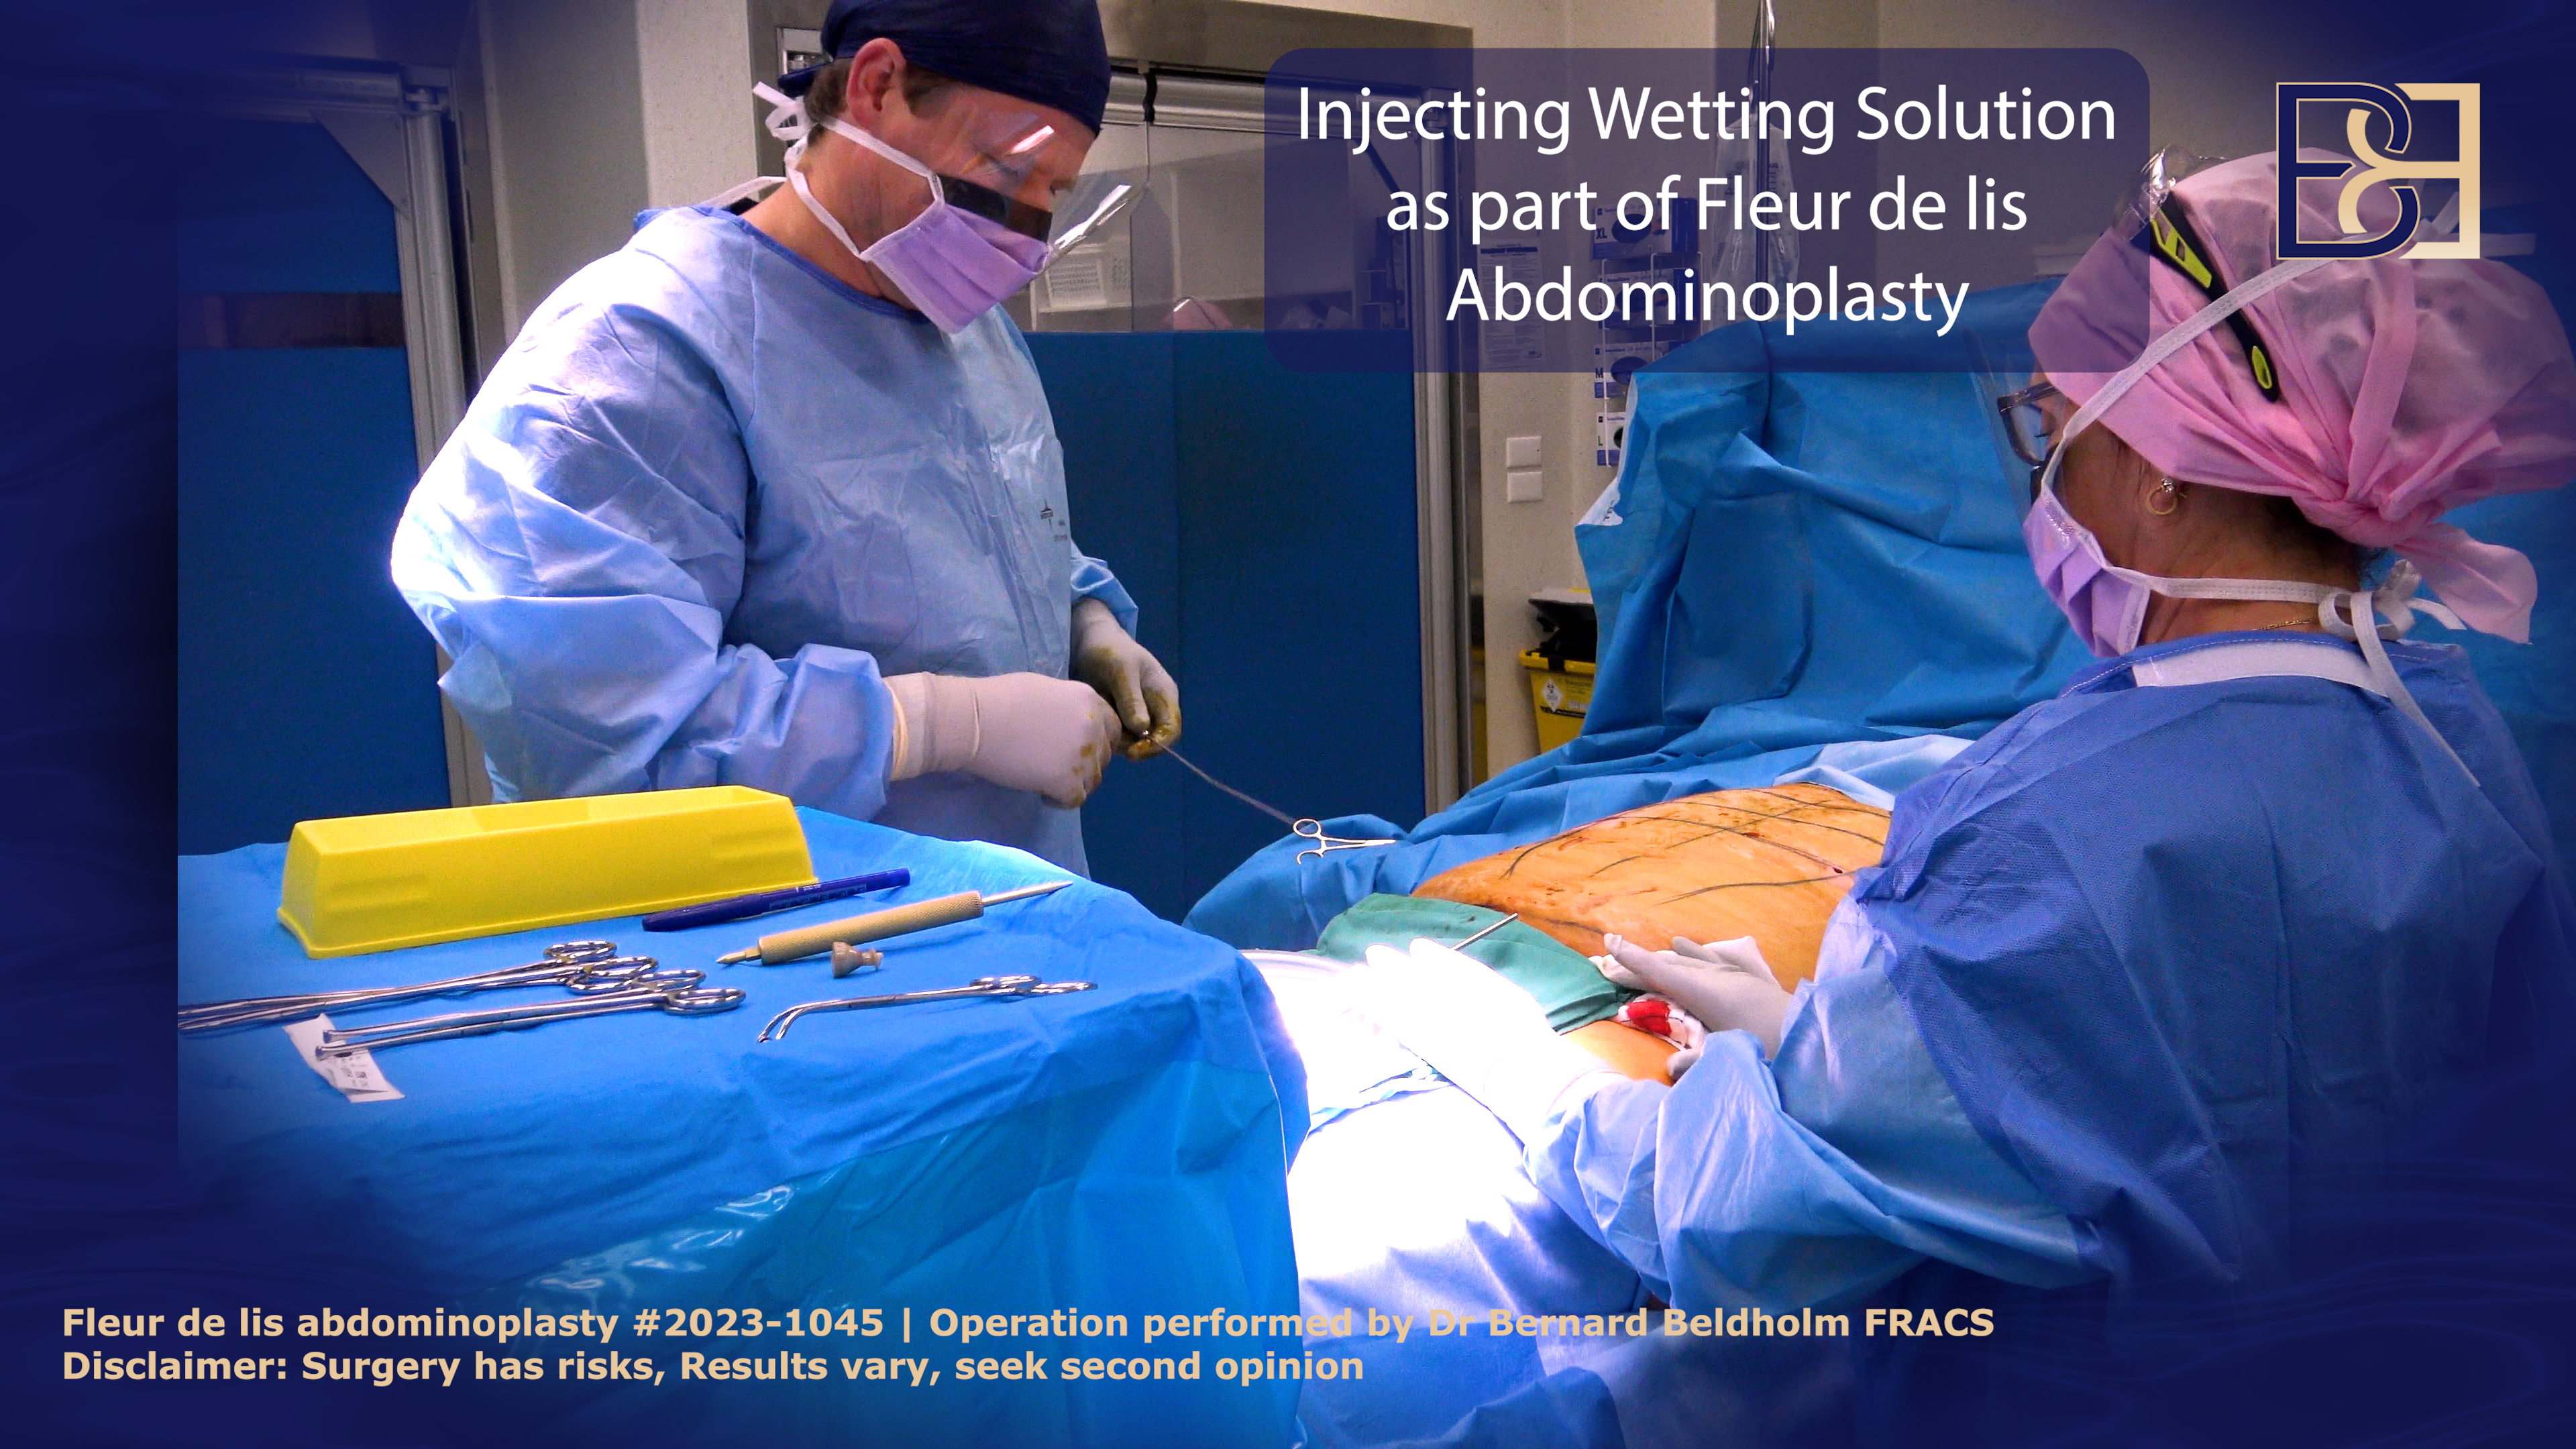 Injecting wetting solution into tissues for liposuction | beldholm.com.au